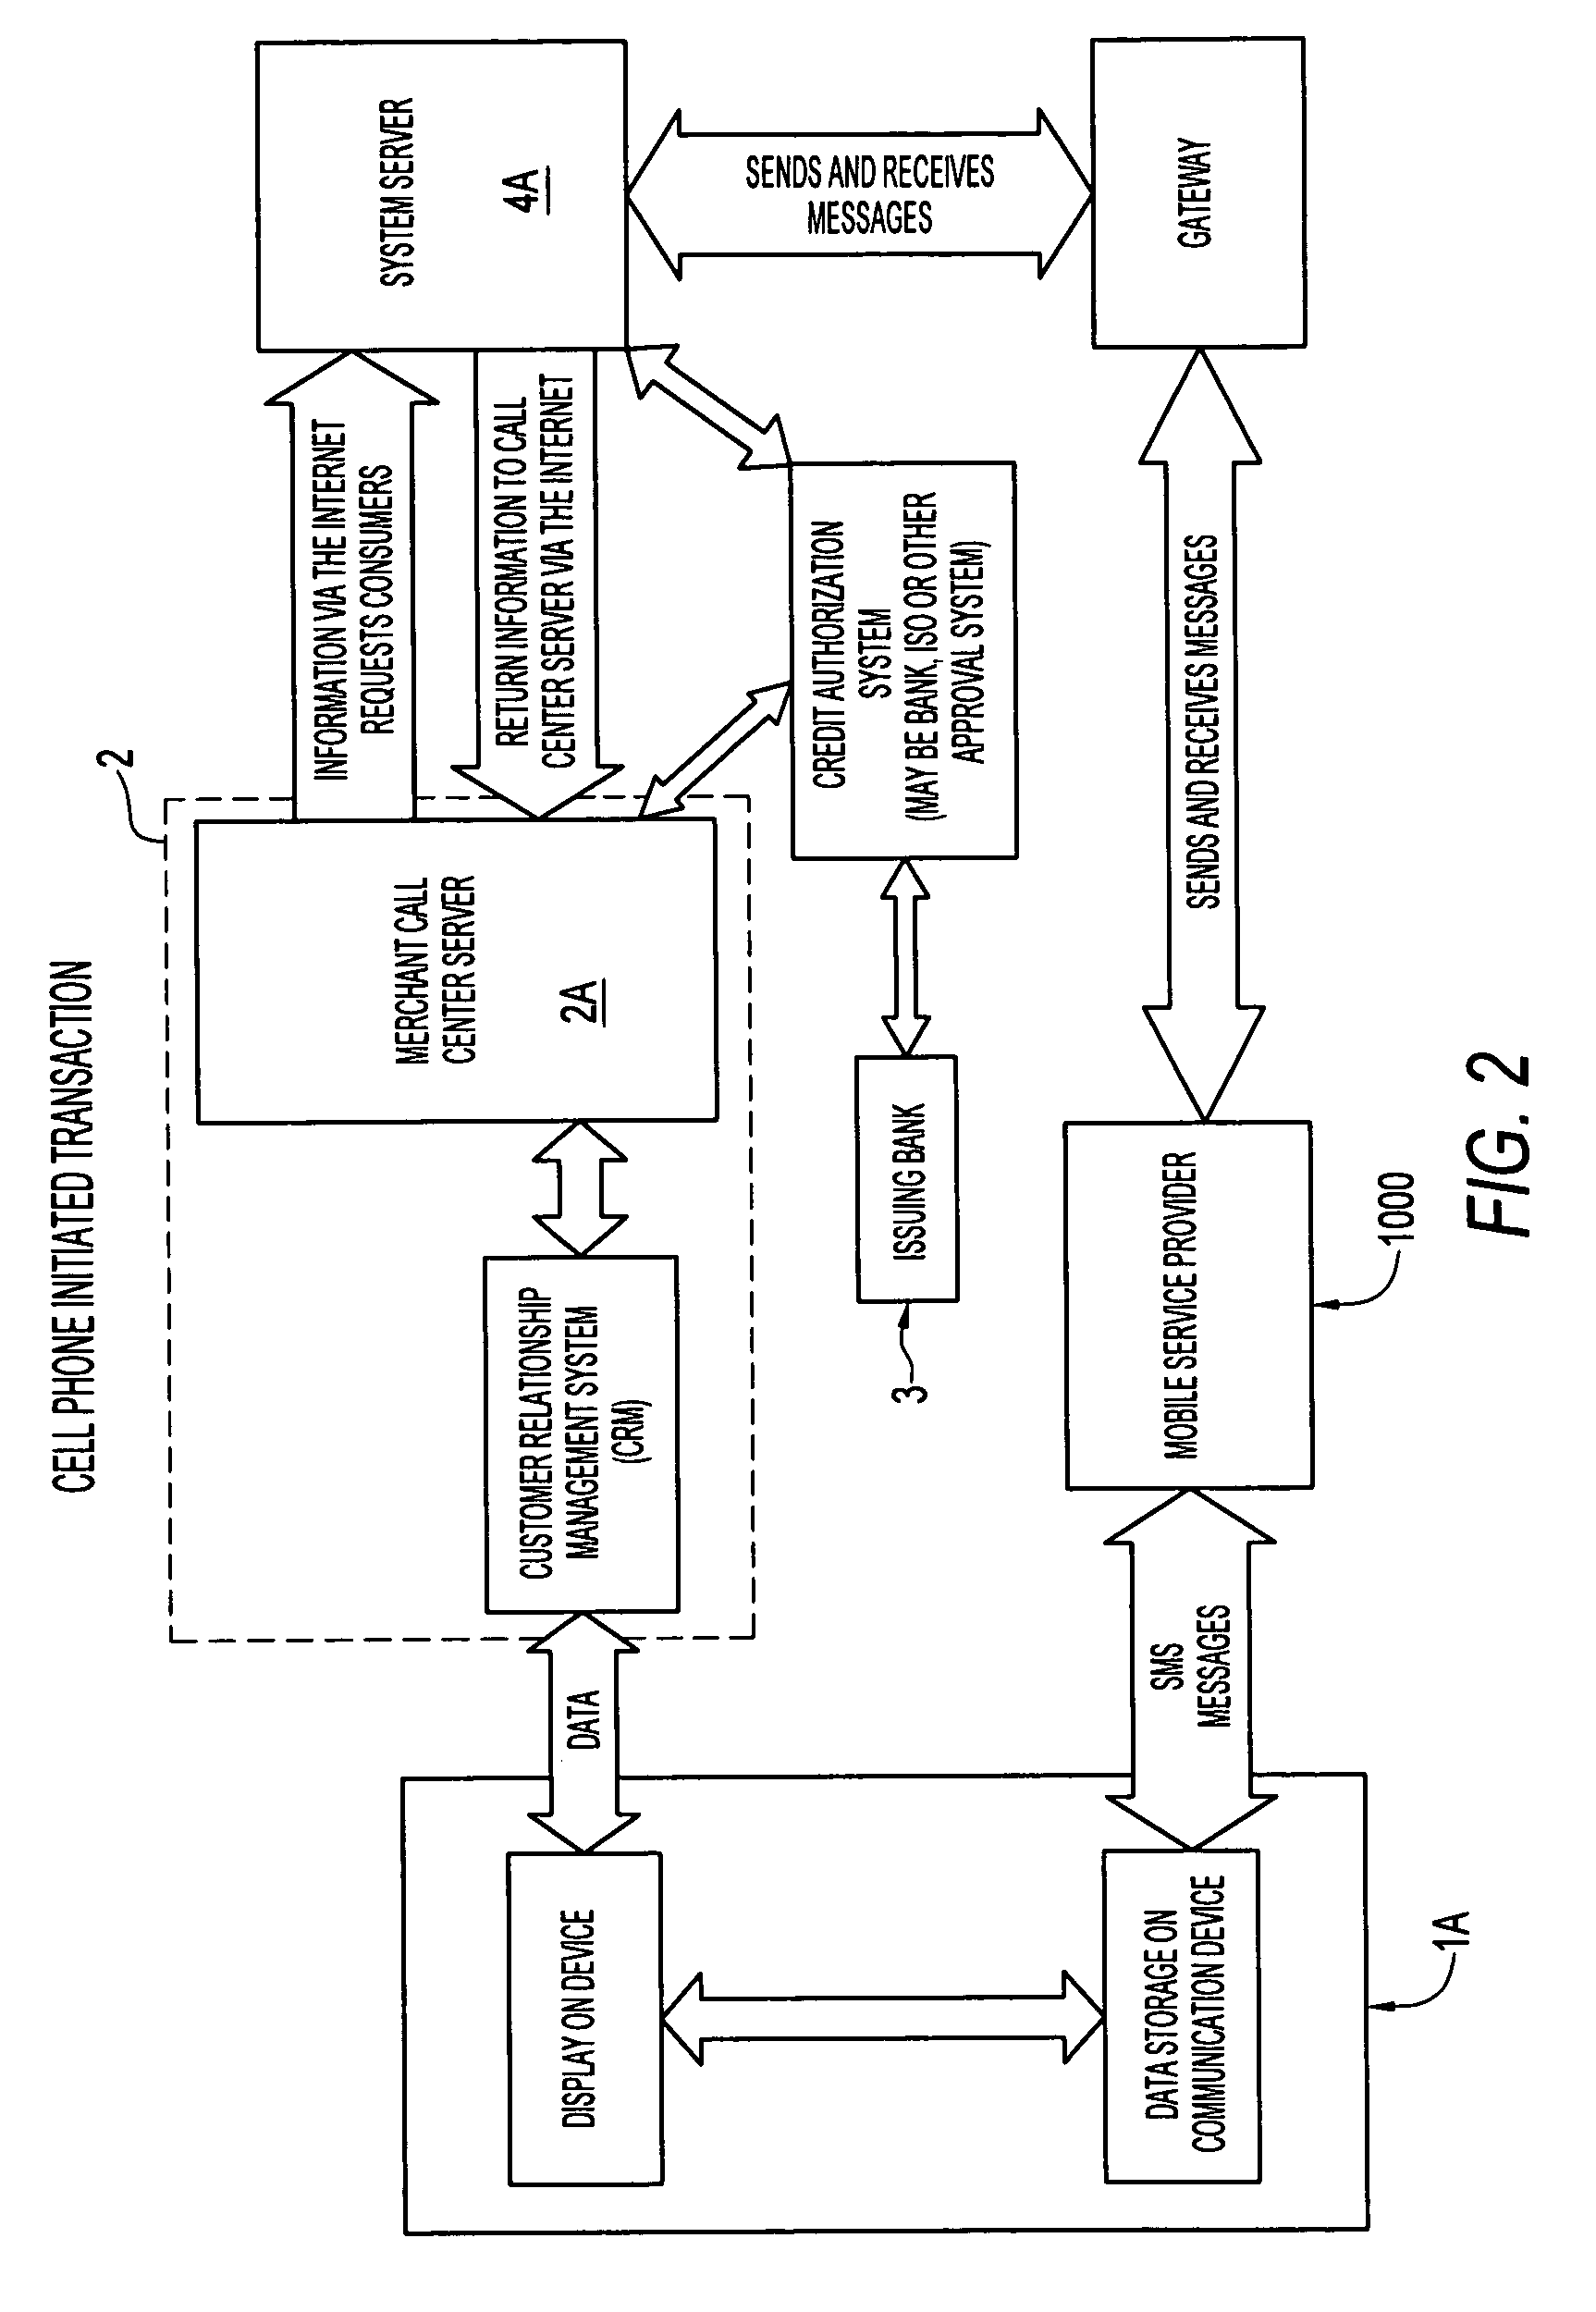 Method for electronic payment